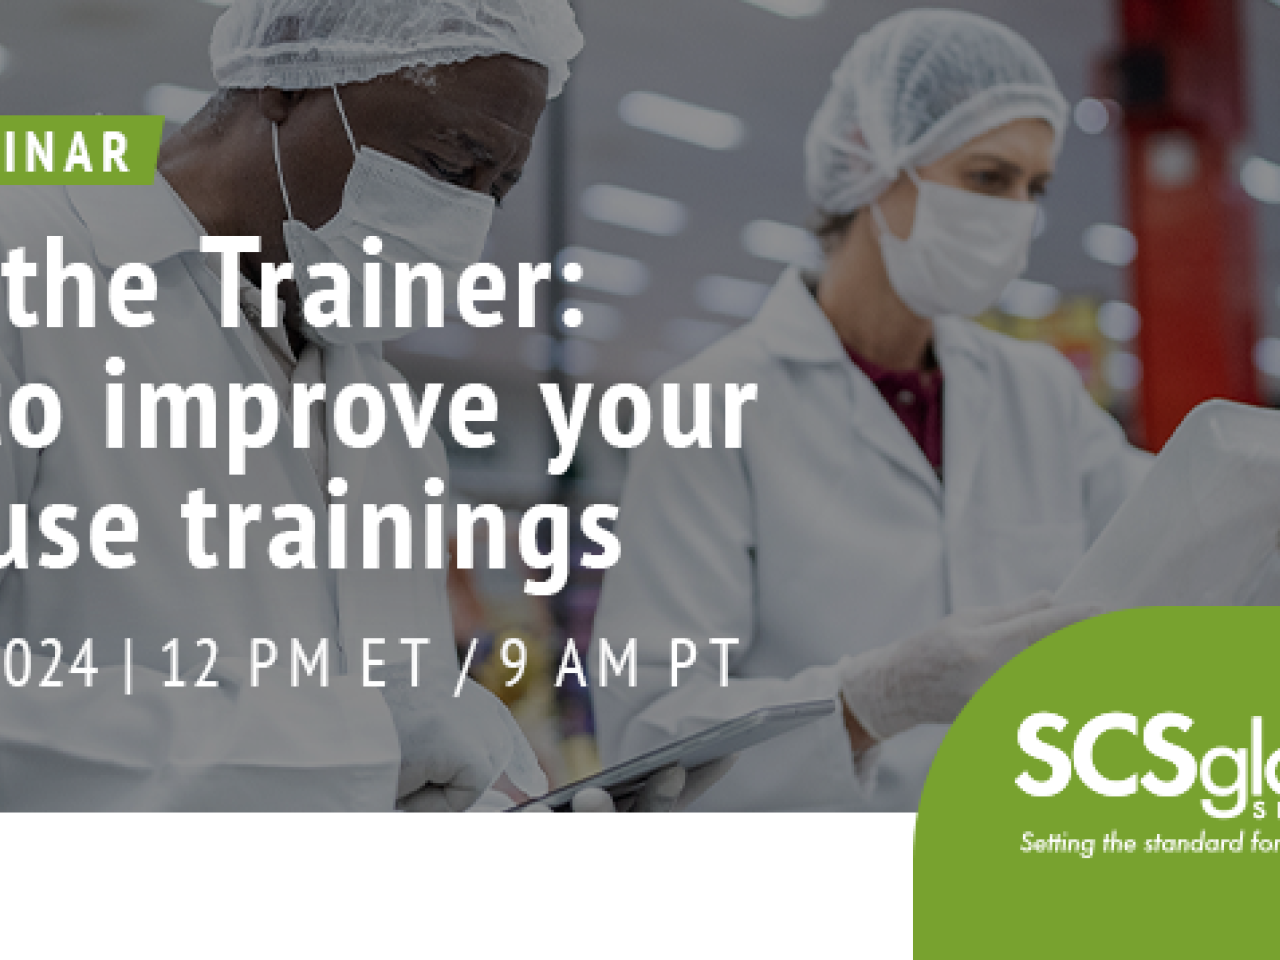 Train the Trainer: How to Improve Your In-House Trainings